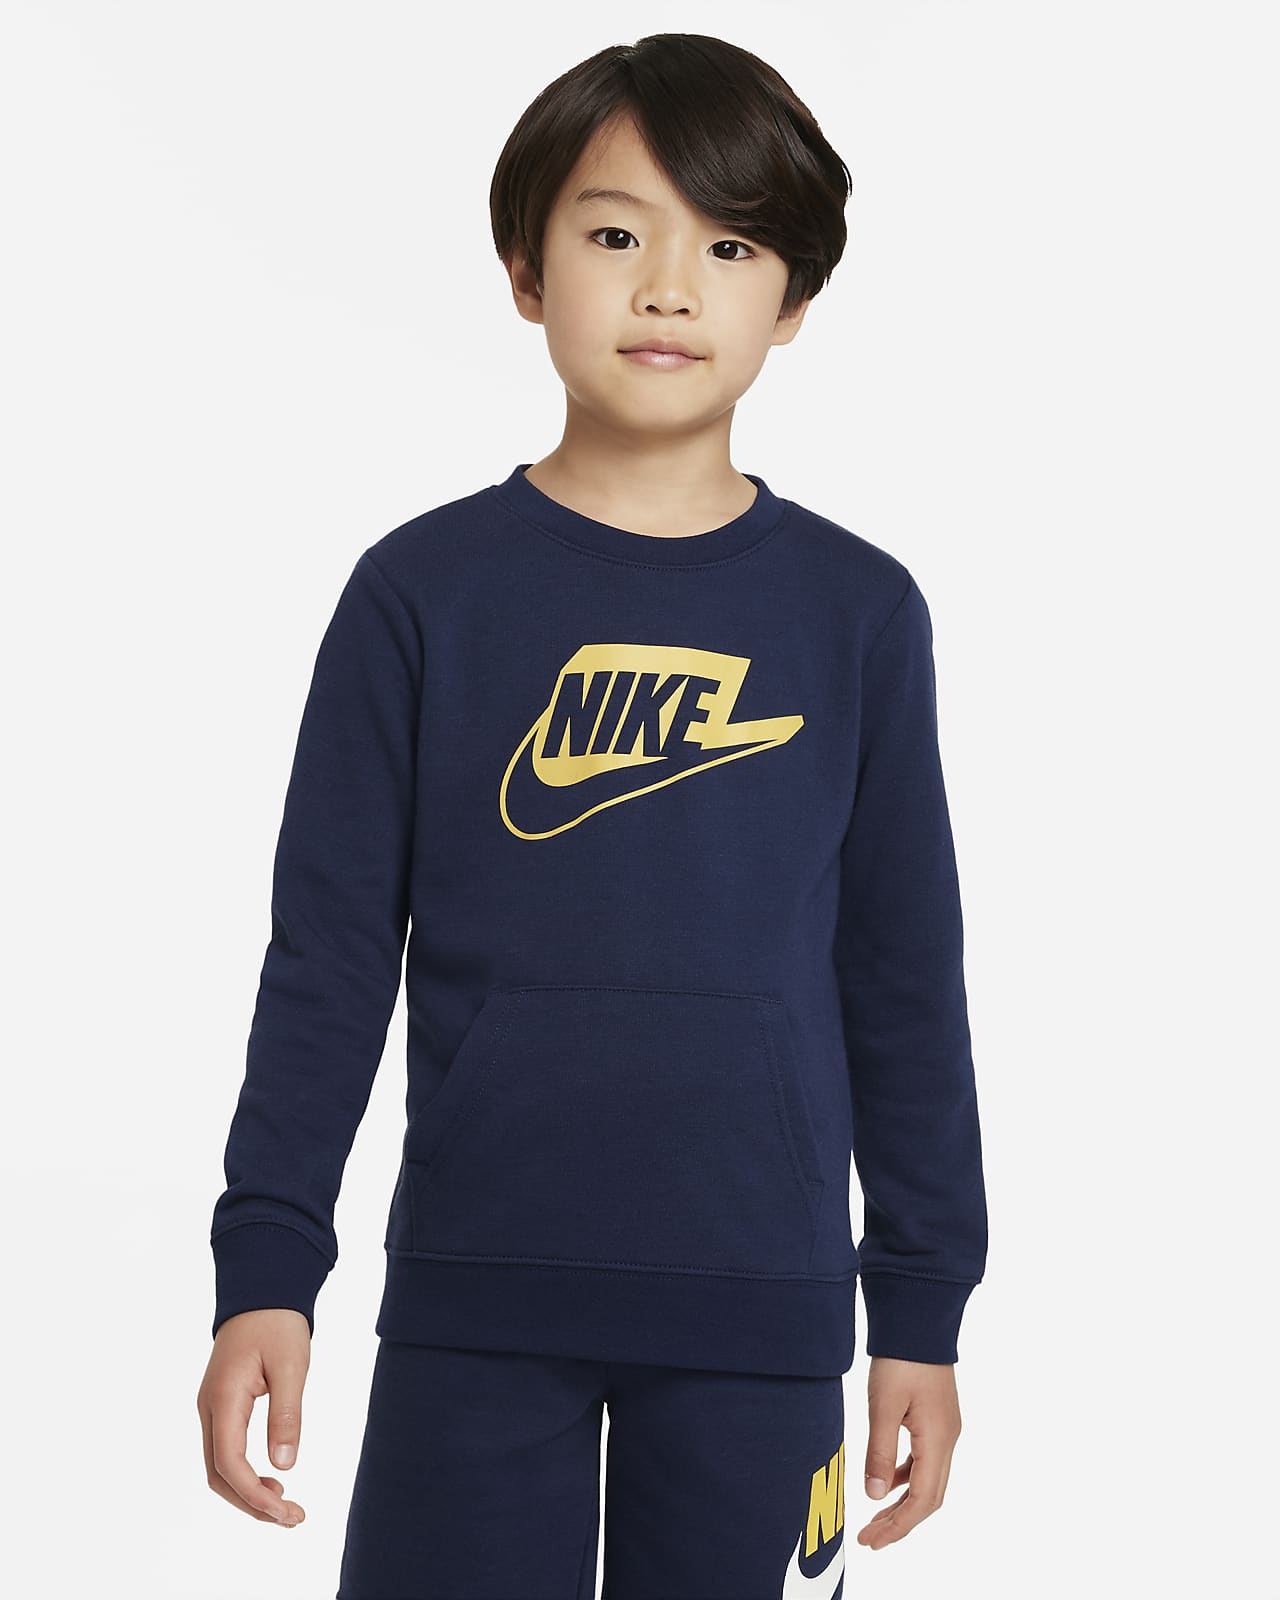 Nike Little Kids' French Terry Crew